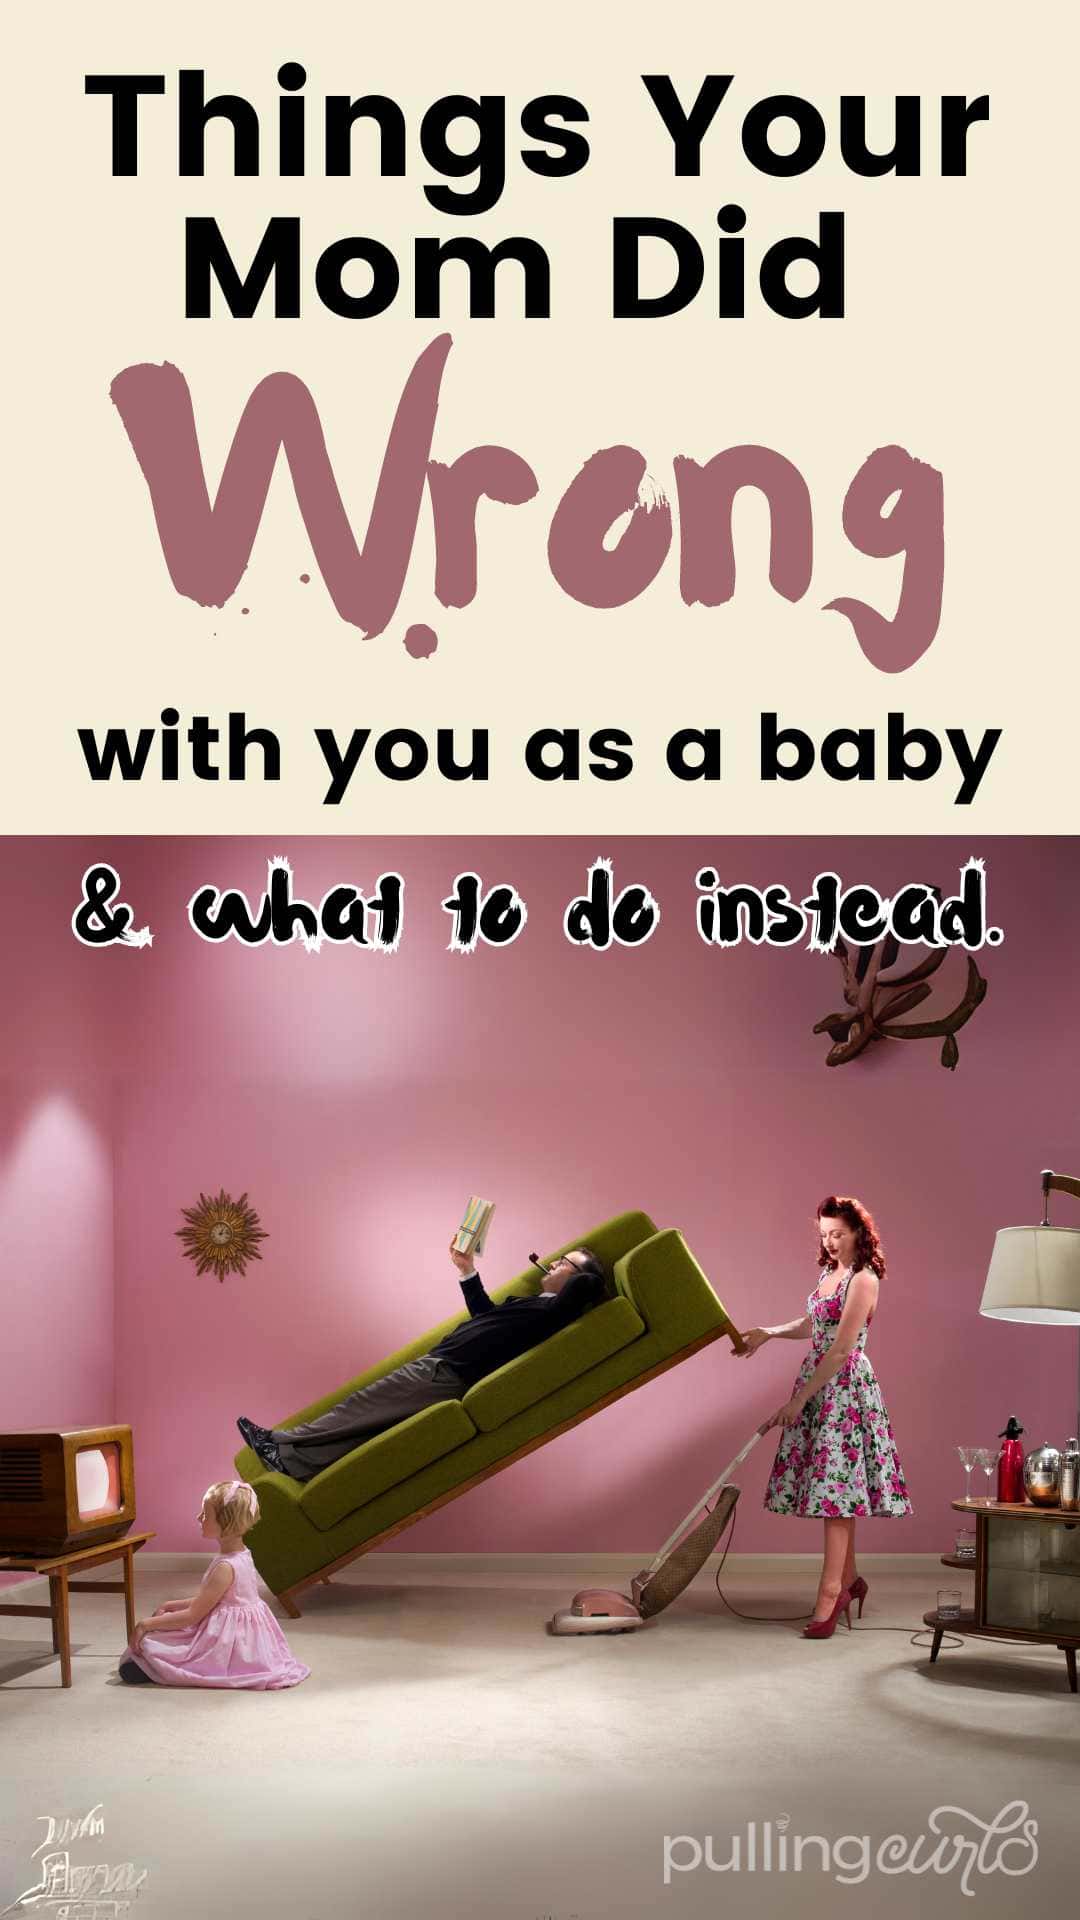 Your mom might do things different with a newborn in the wrong way. via @pullingcurls